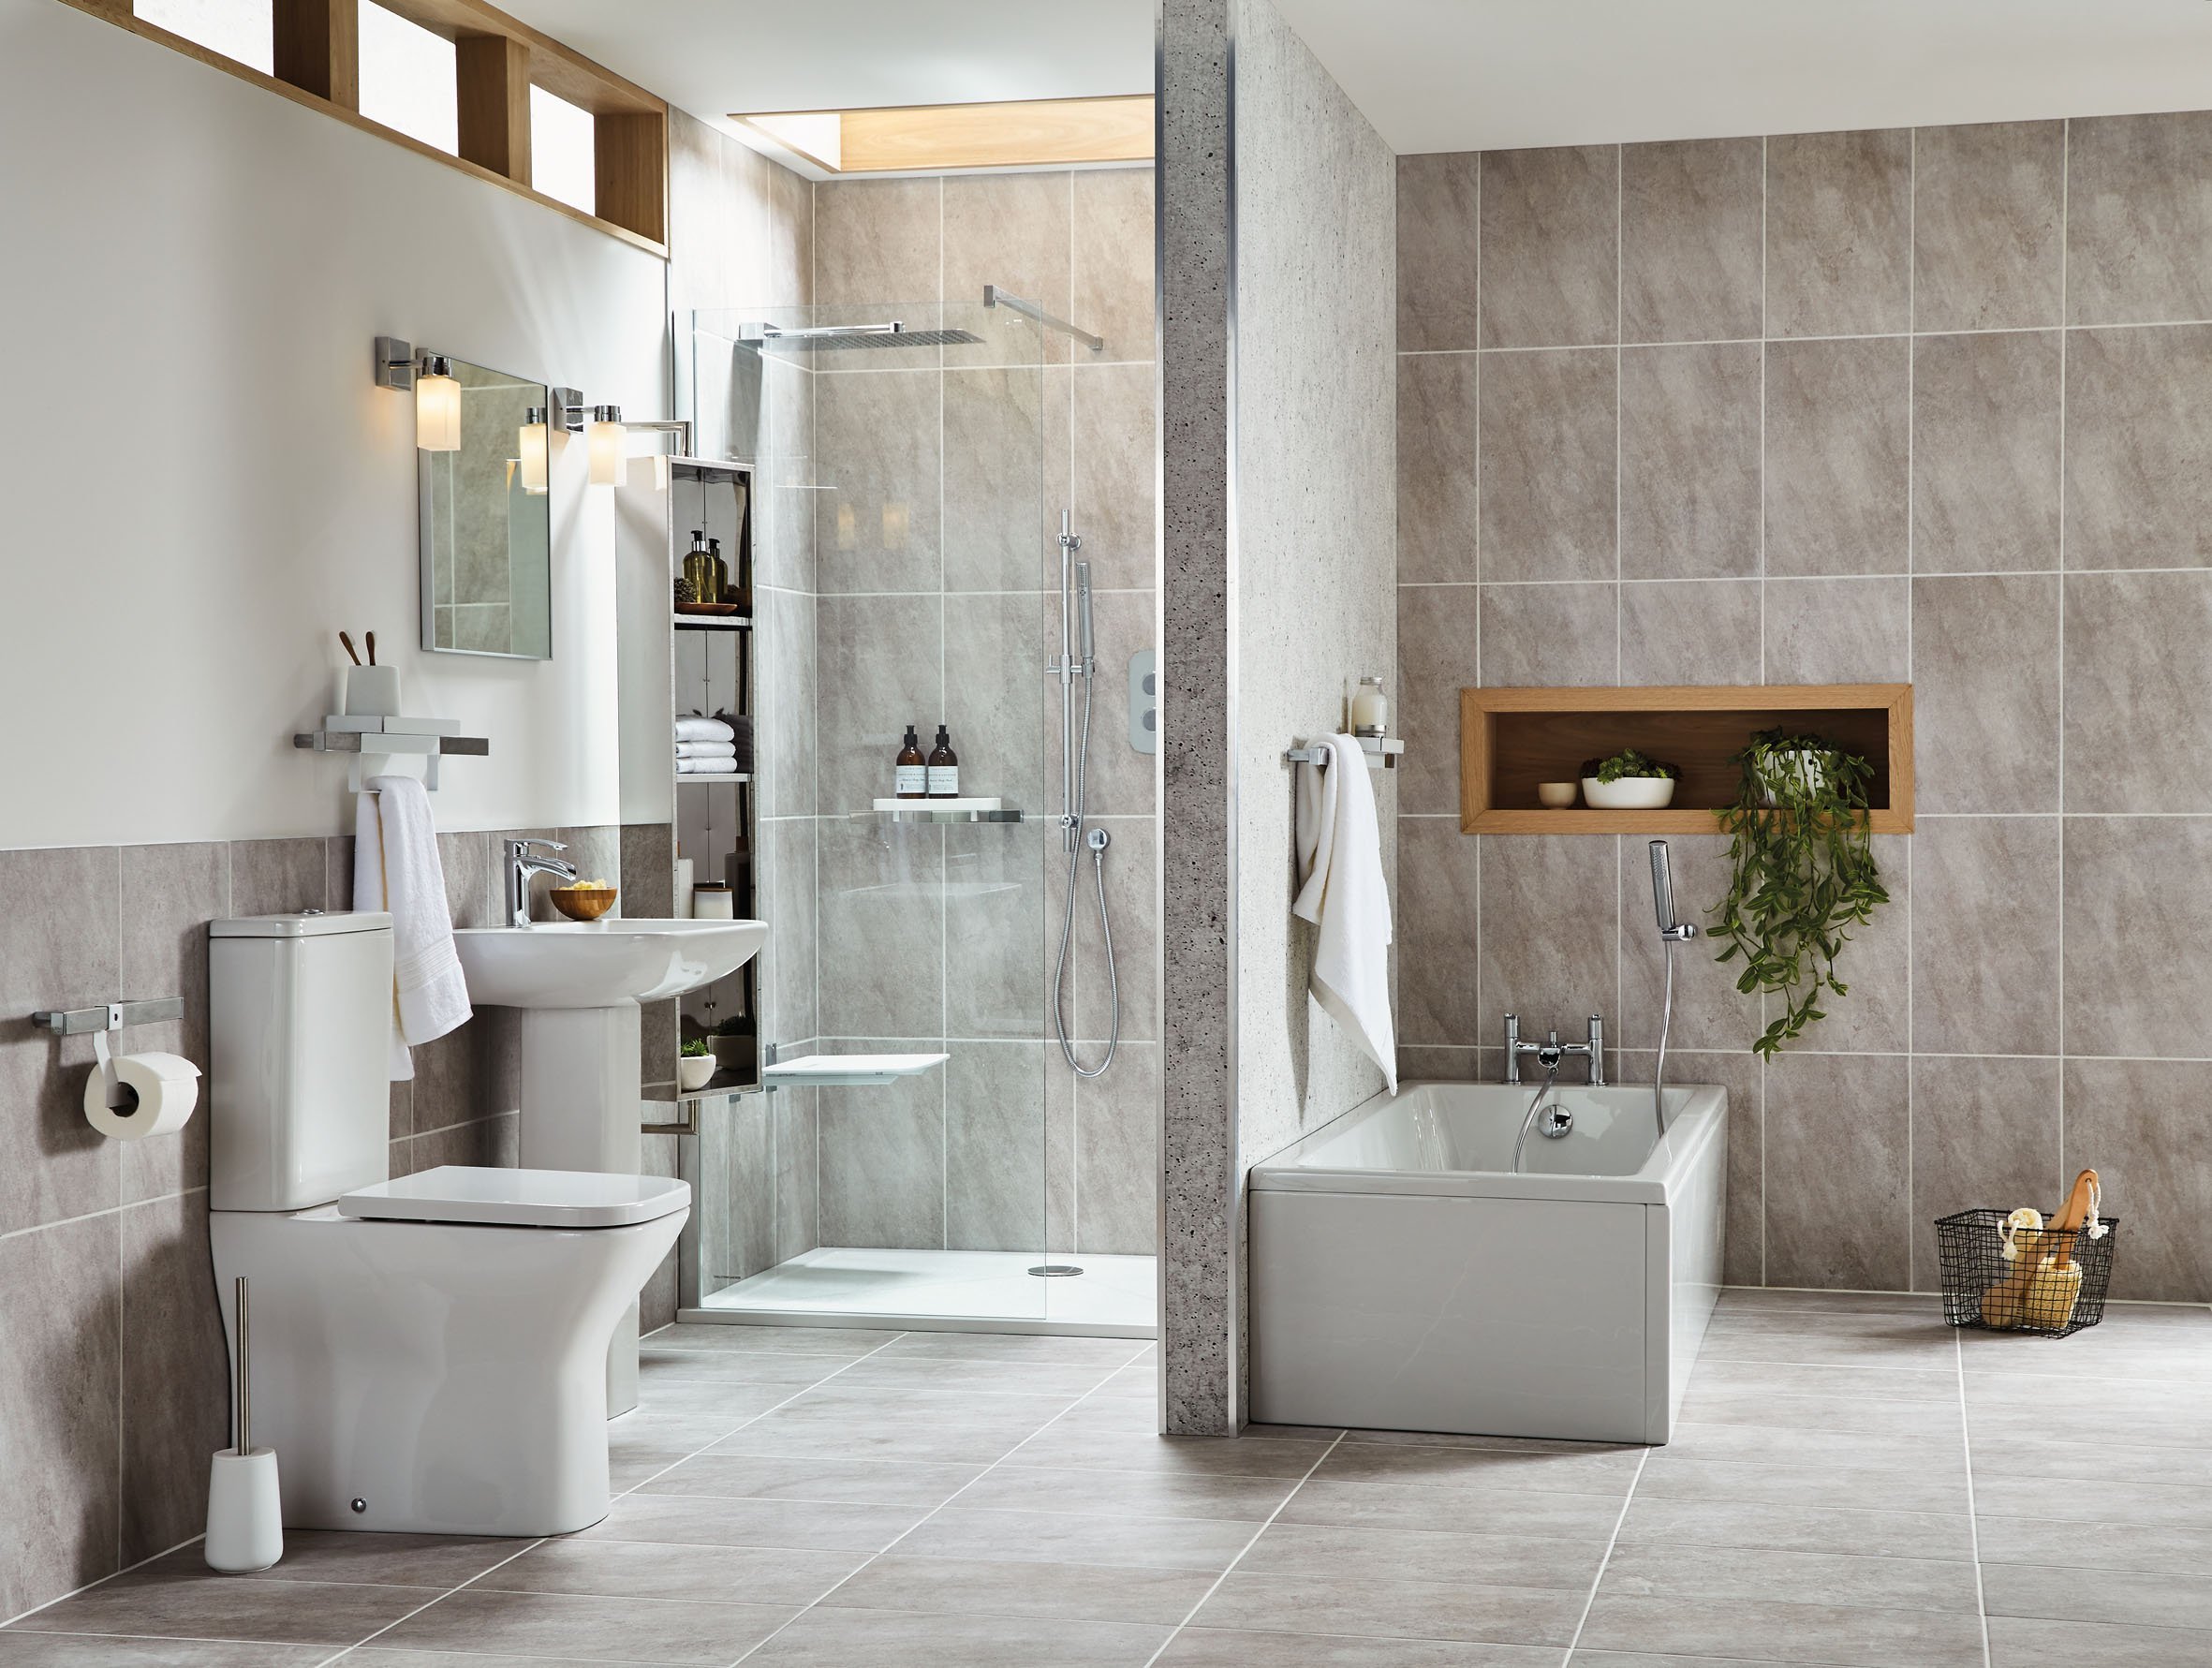 Our Walk-In Shower Ideas Guide